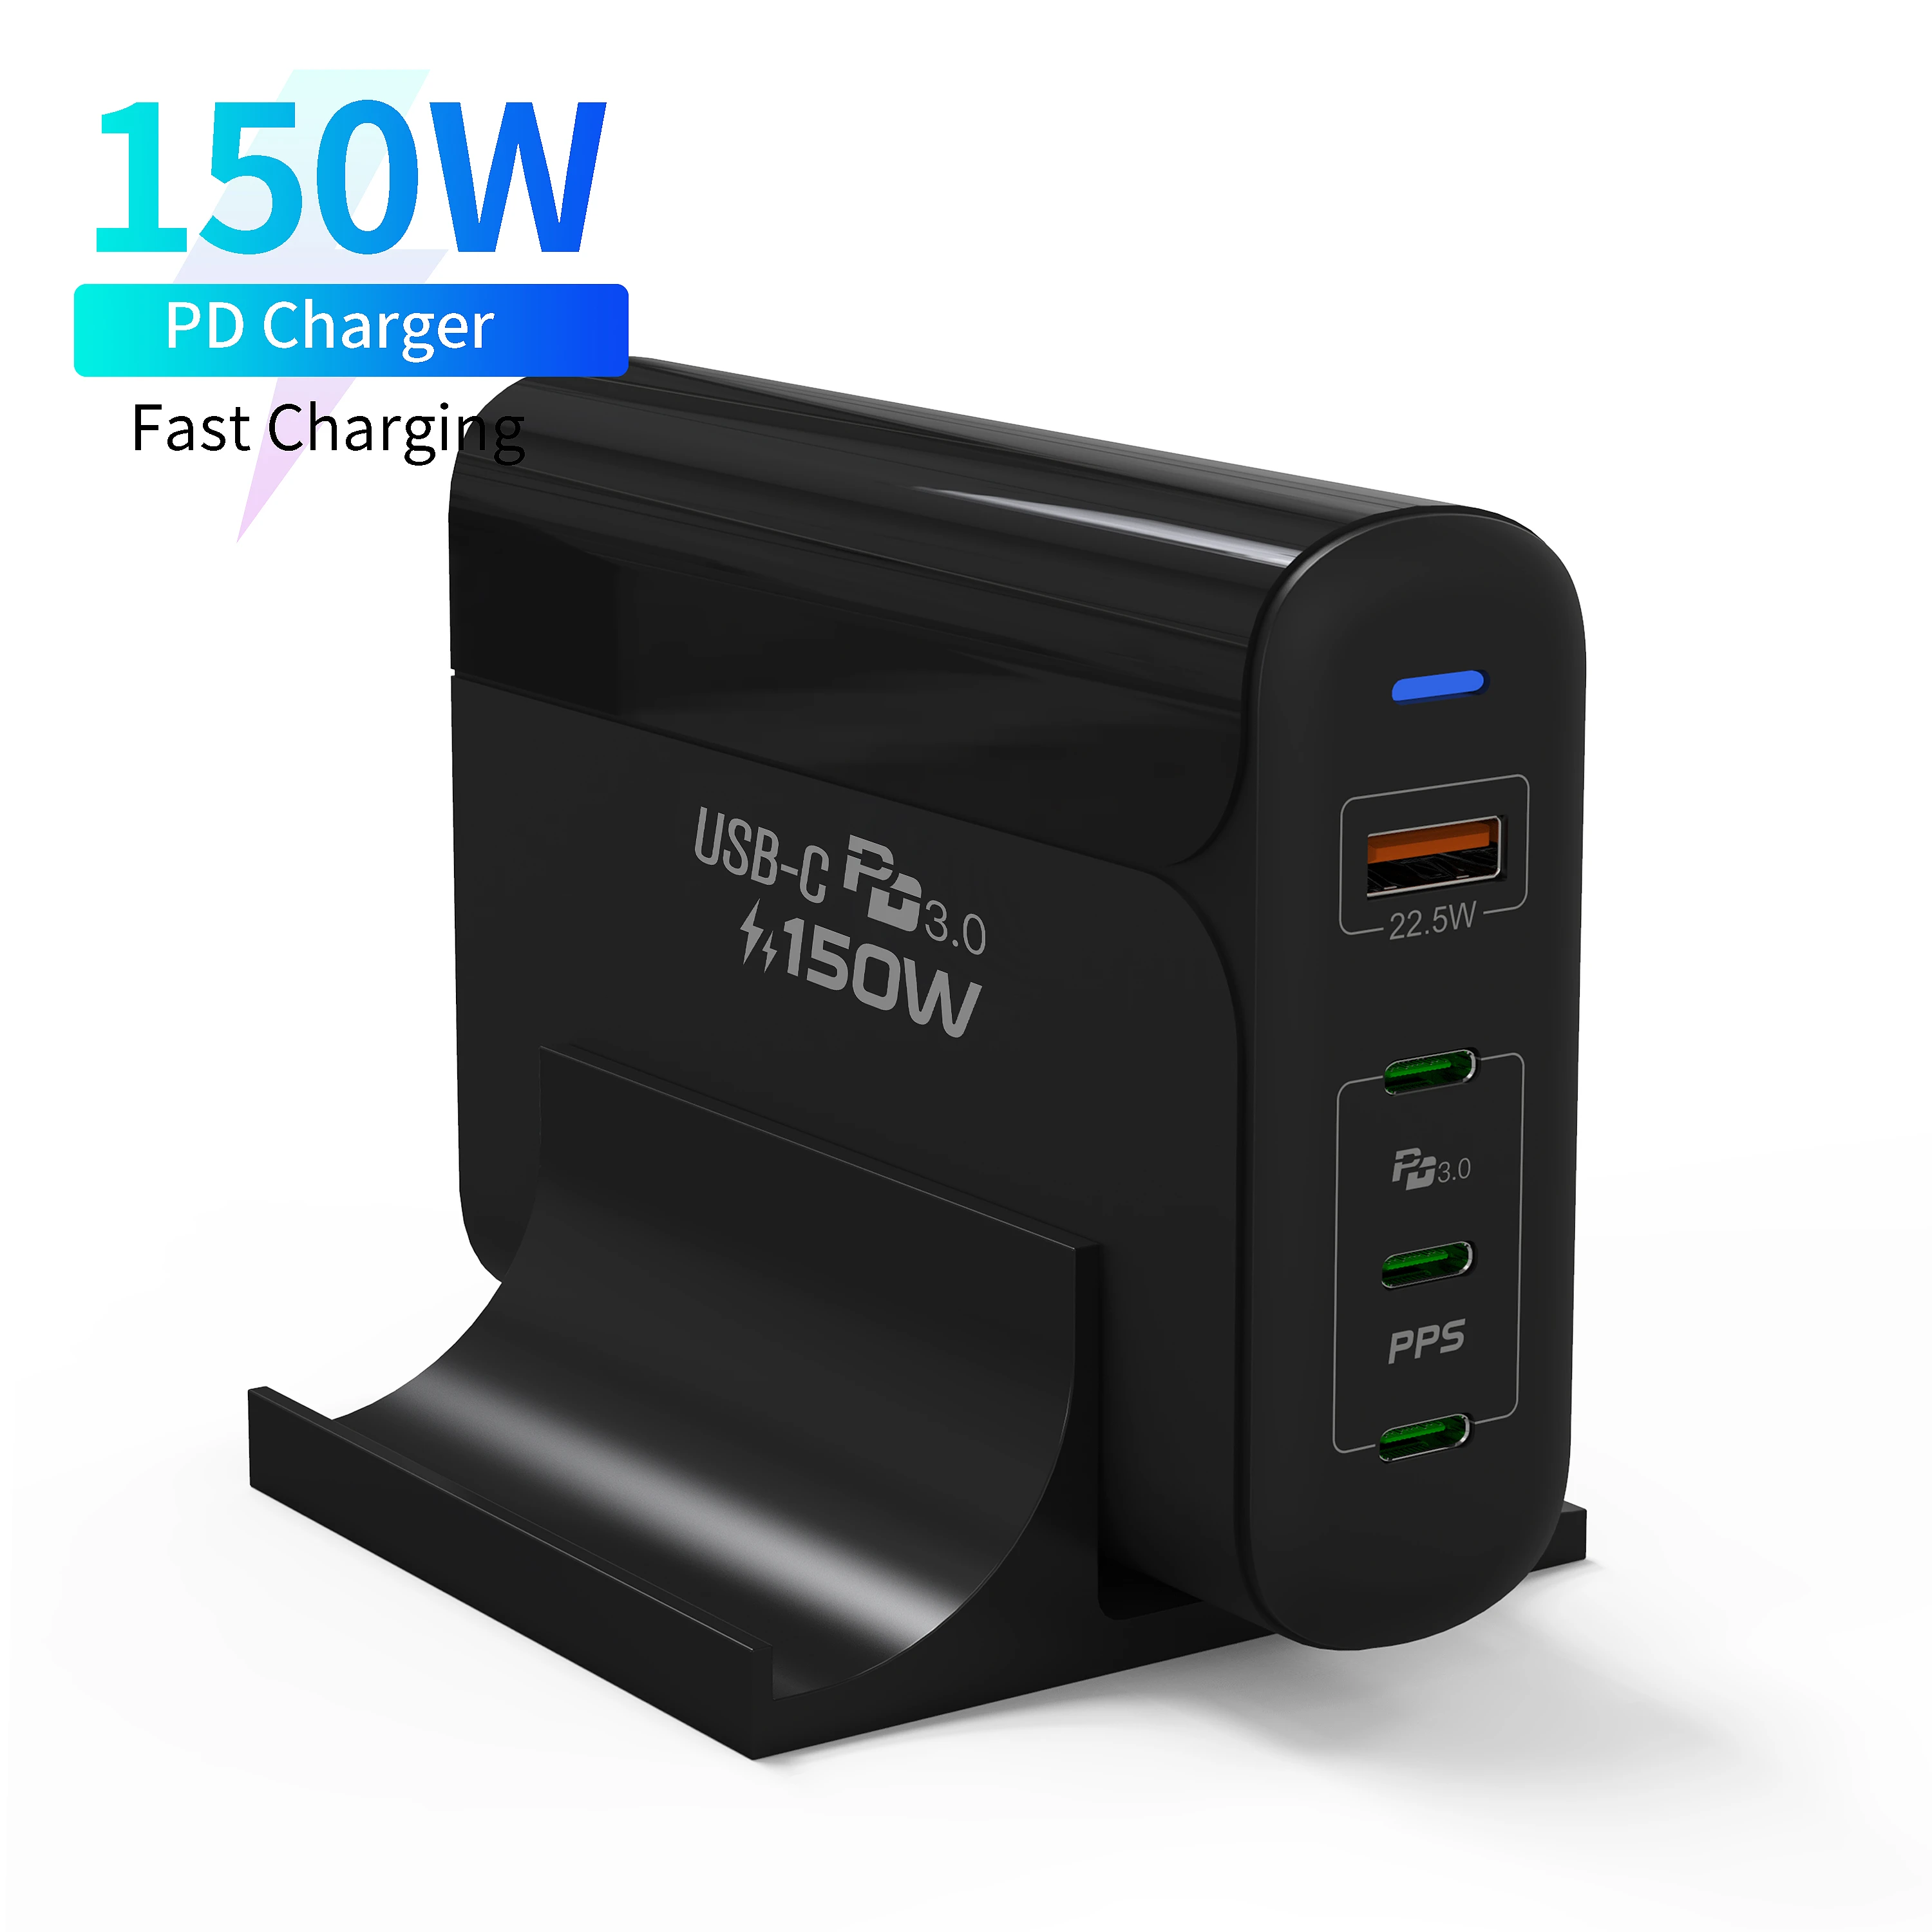 USB Type C Laptop Charger Power Adapter,120W 5 Port USB Wall Charger with 18W & 60W Type C Power Delivery PD Charger and QC 4.0